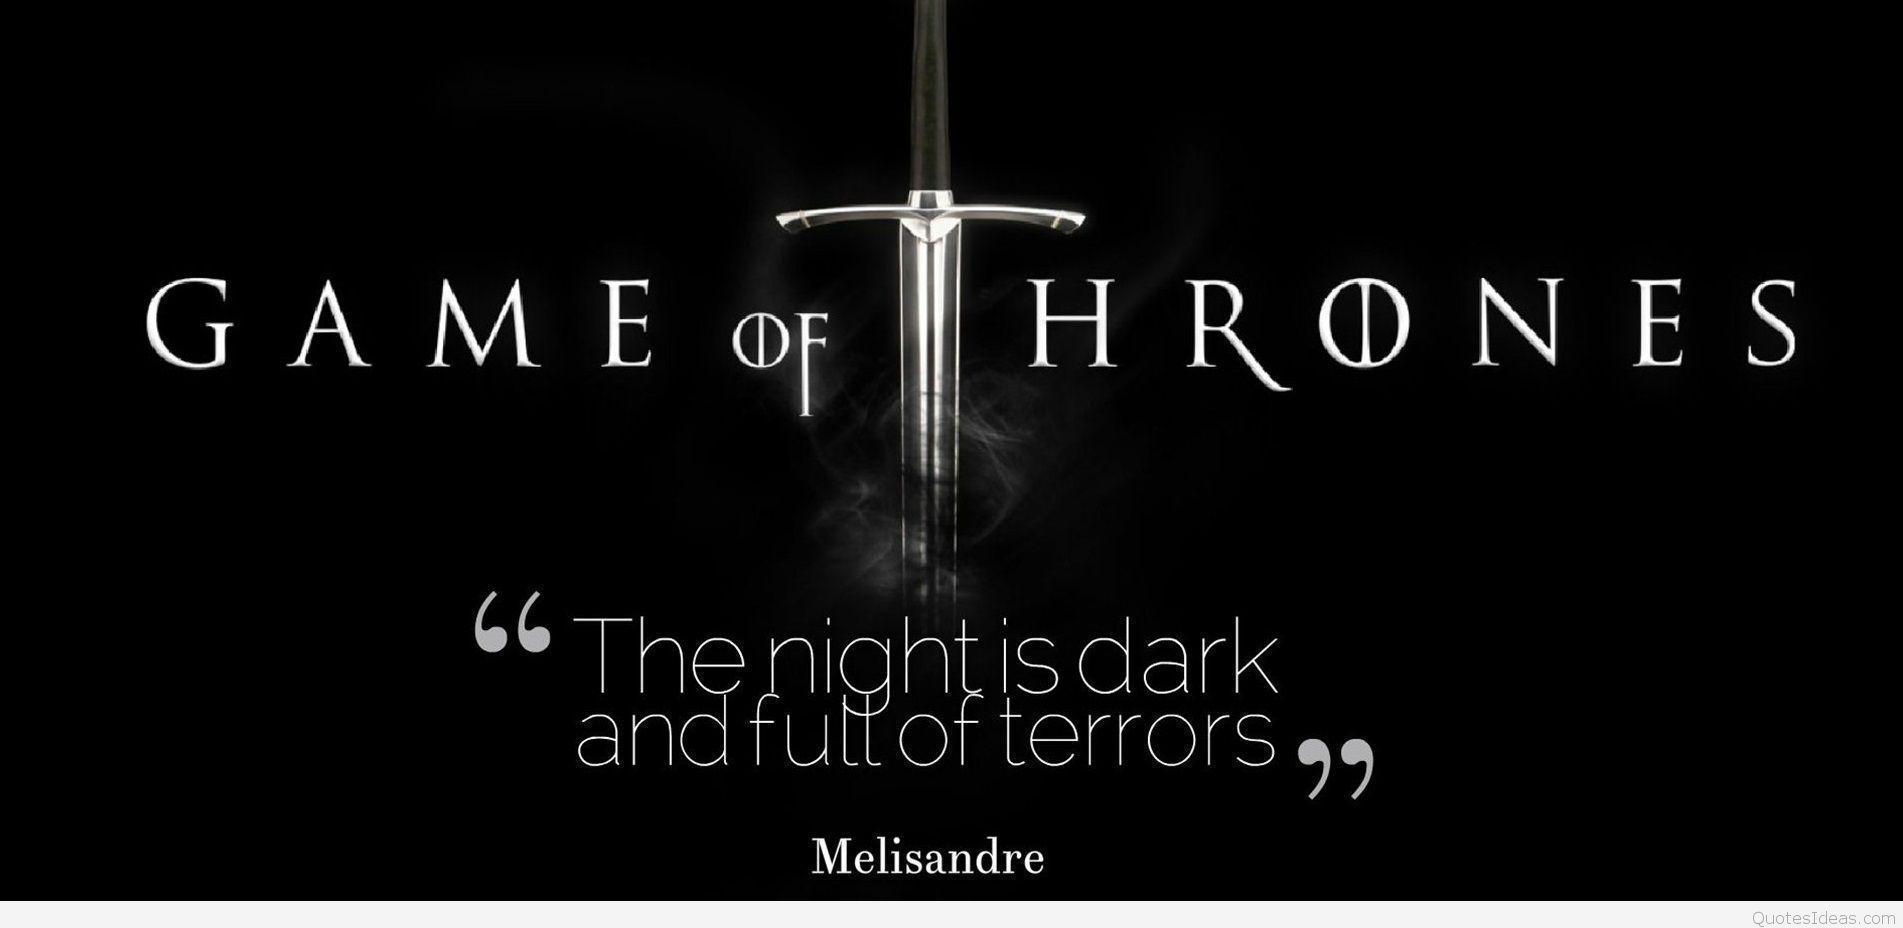 Game Of Thrones Quotes Wallpapers Wallpaper Cave Images, Photos, Reviews